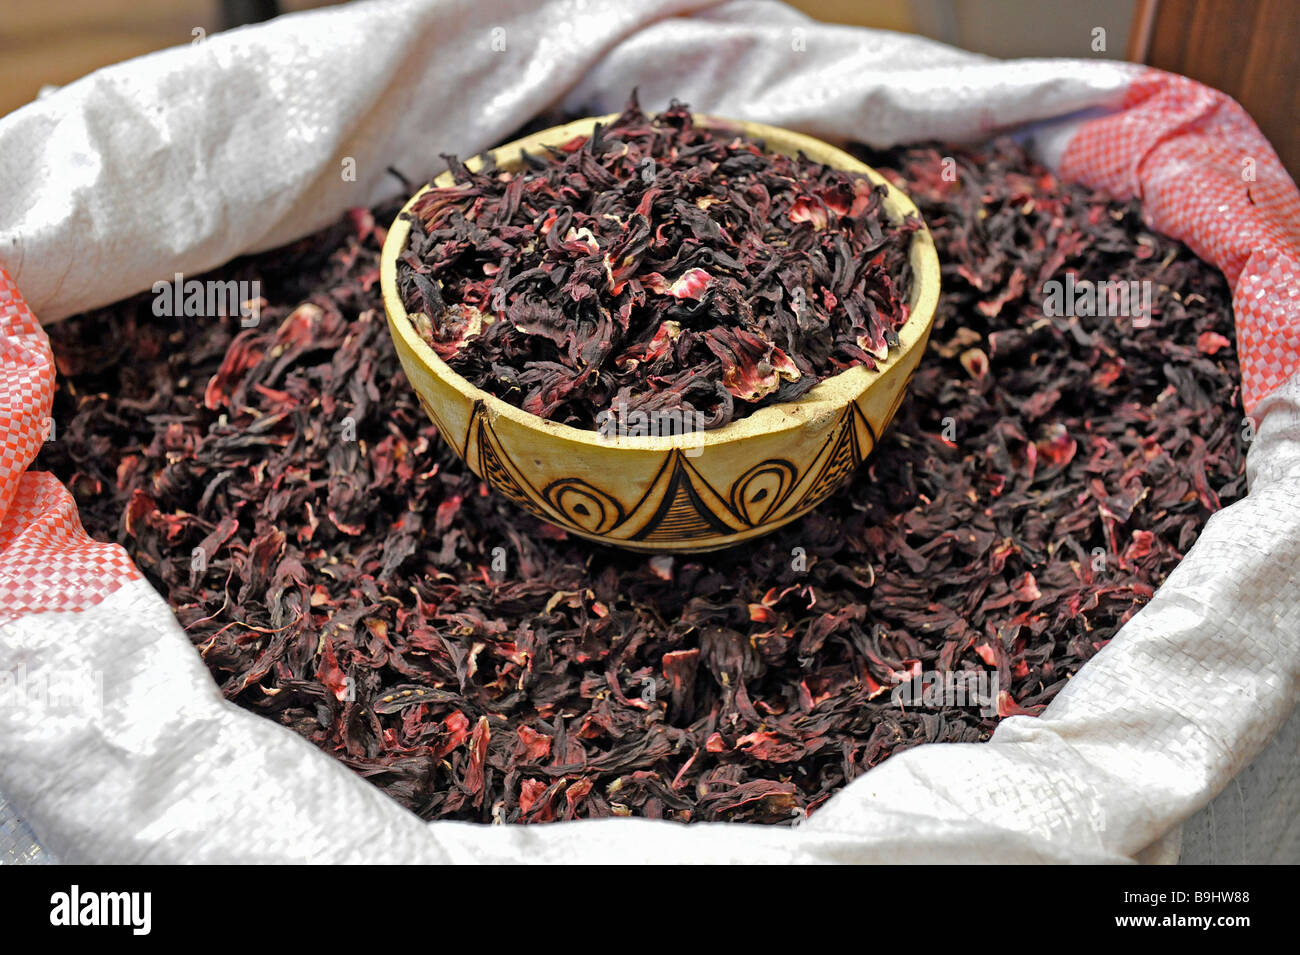 Hibiscus blossoms from Burkina Faso, for making tea, on the 'Gruene Woche' agricultural fair in Berlin, Germany, Europe Stock Photo